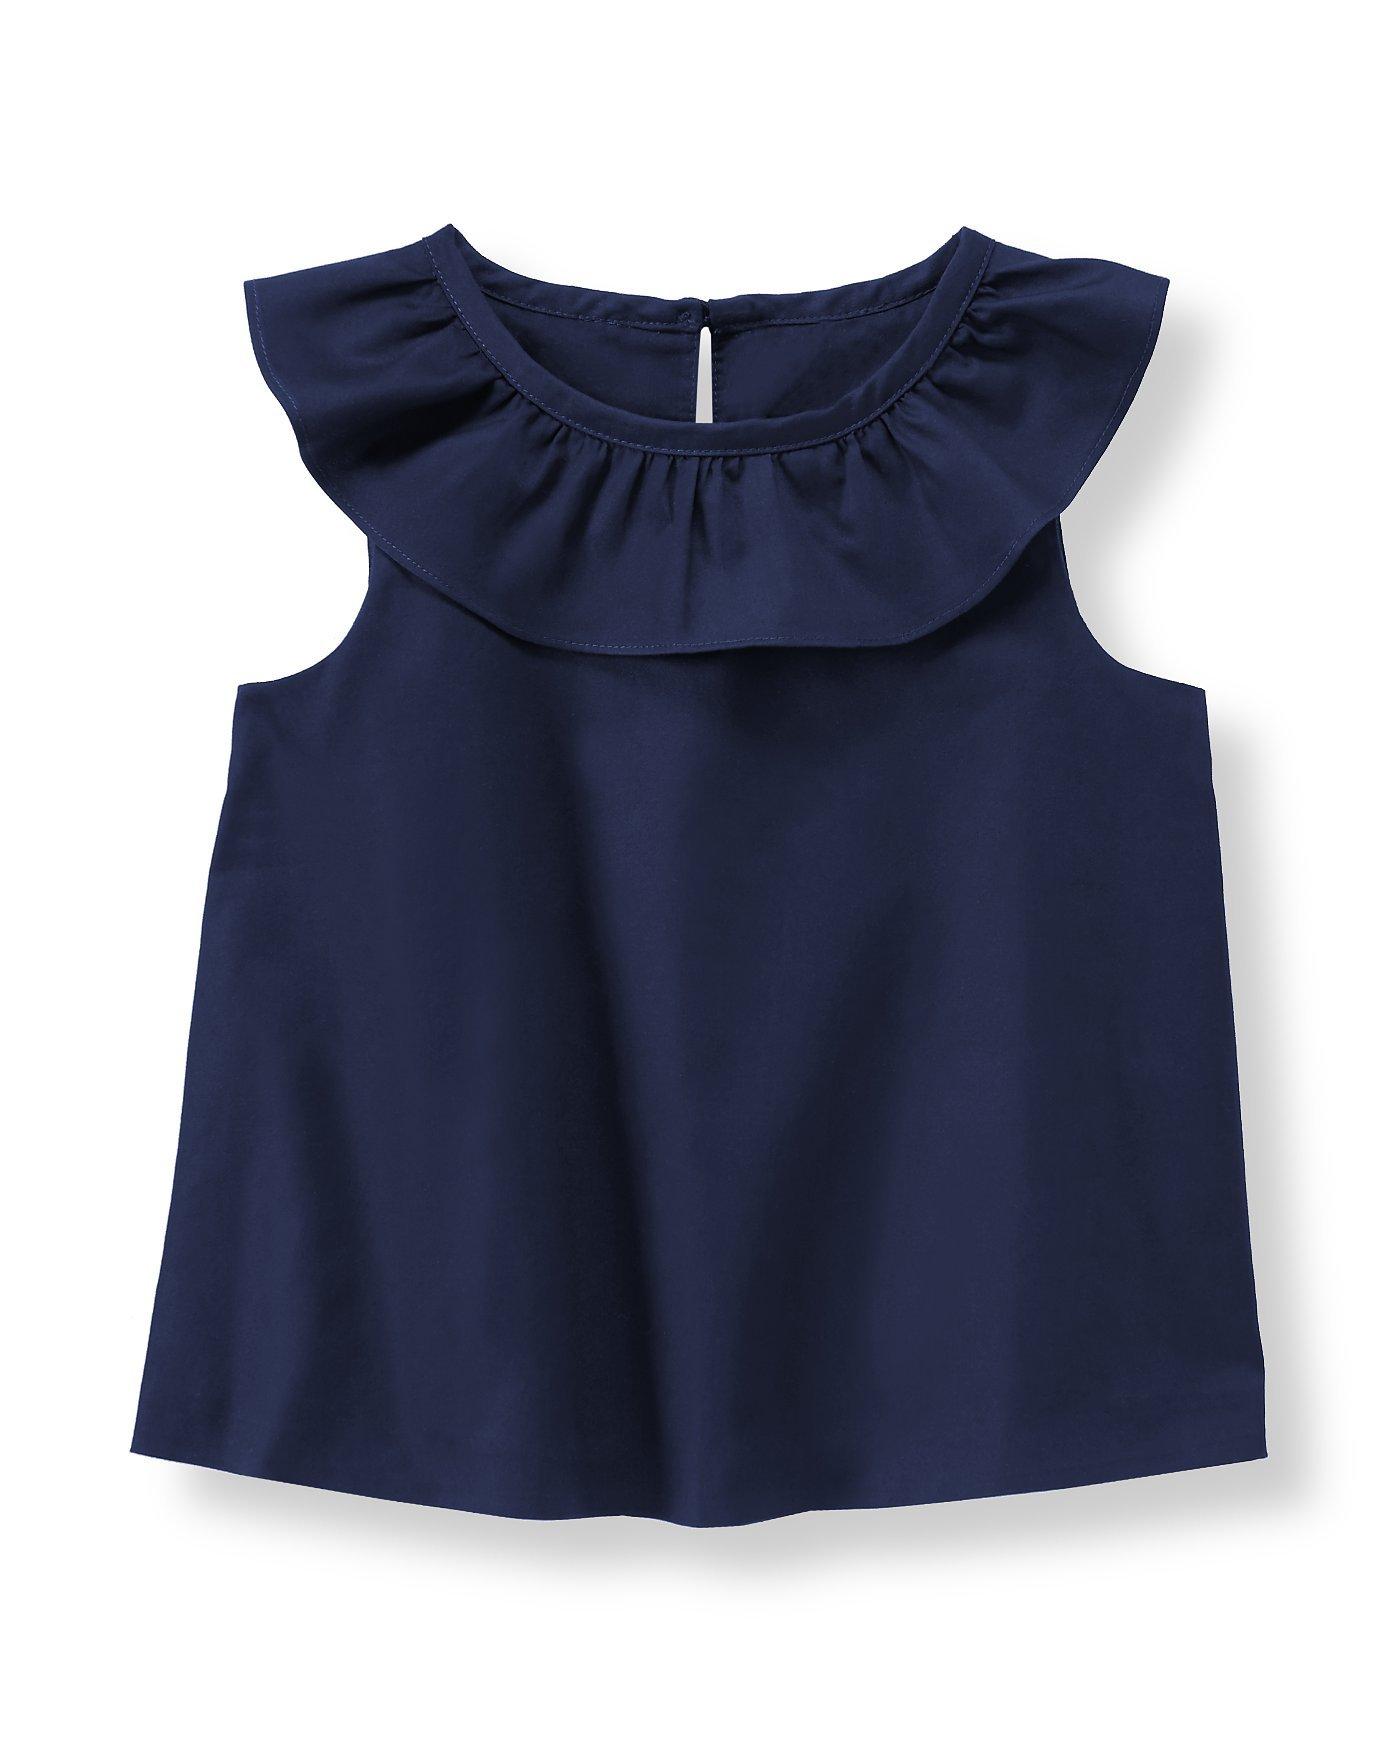 Girl Navy Ruffle Top by Janie and Jack